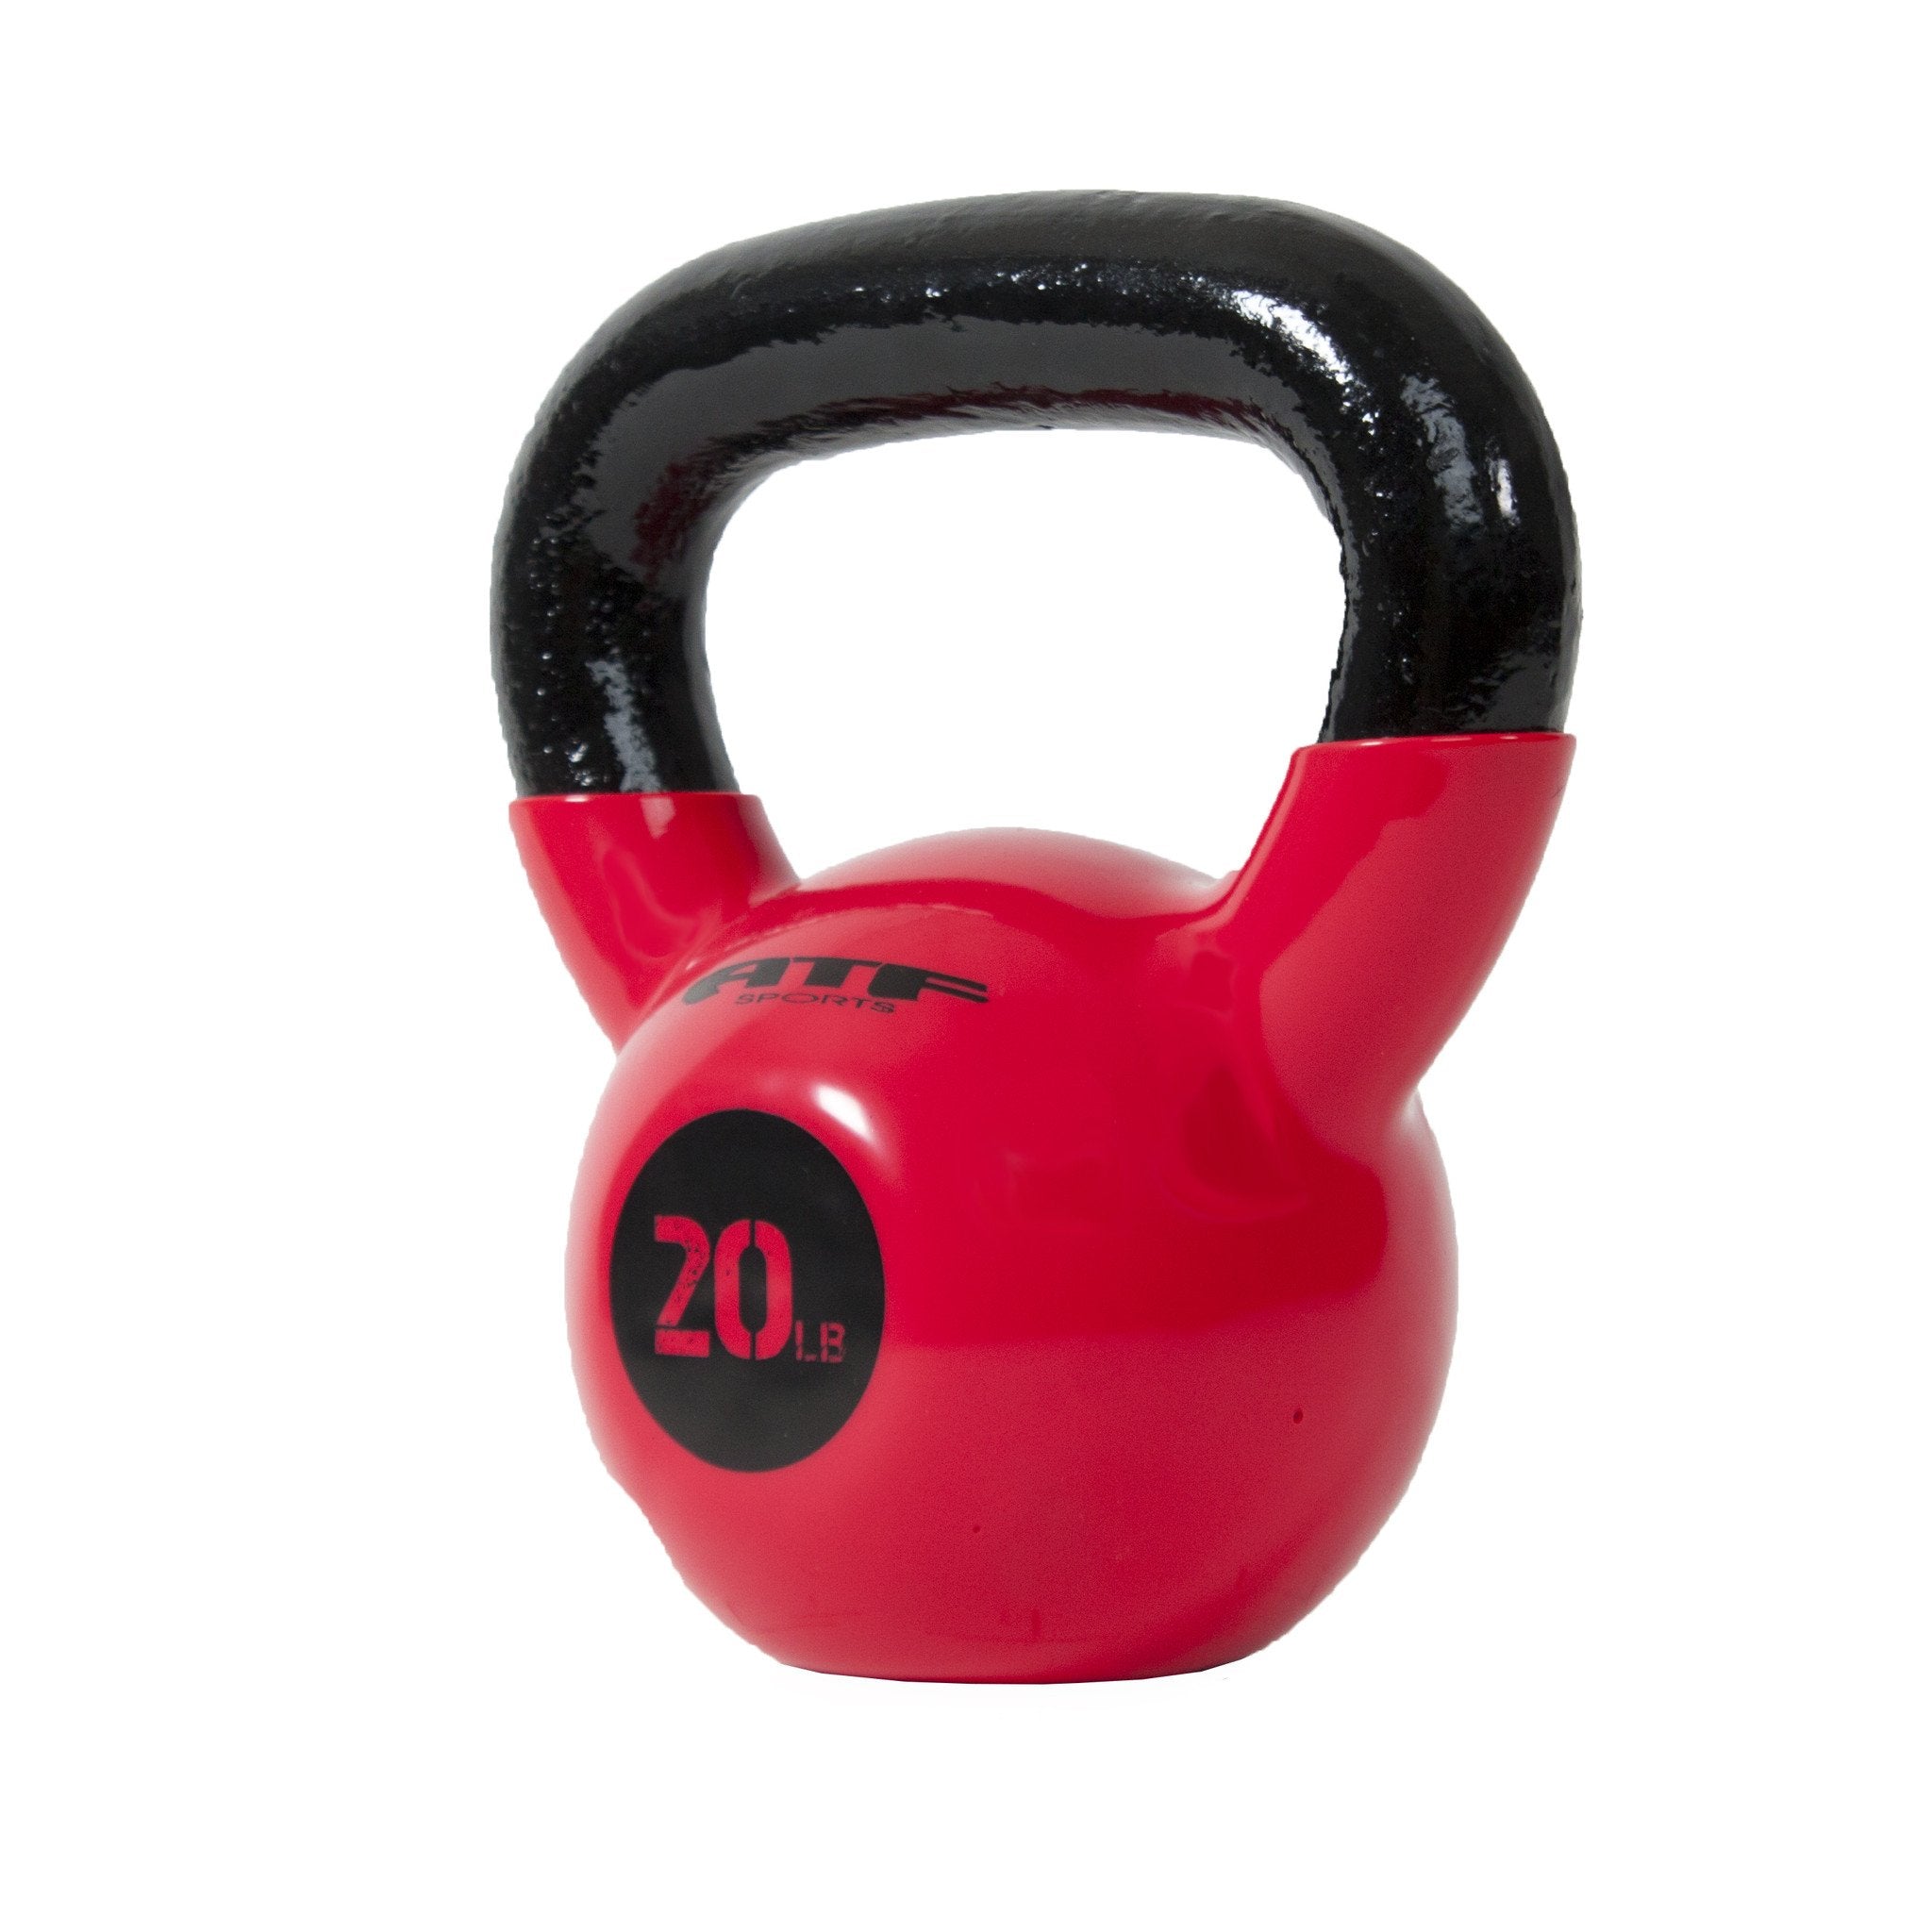 ATF Kettle Bell Fitness Accessories 20lb ATF Sports